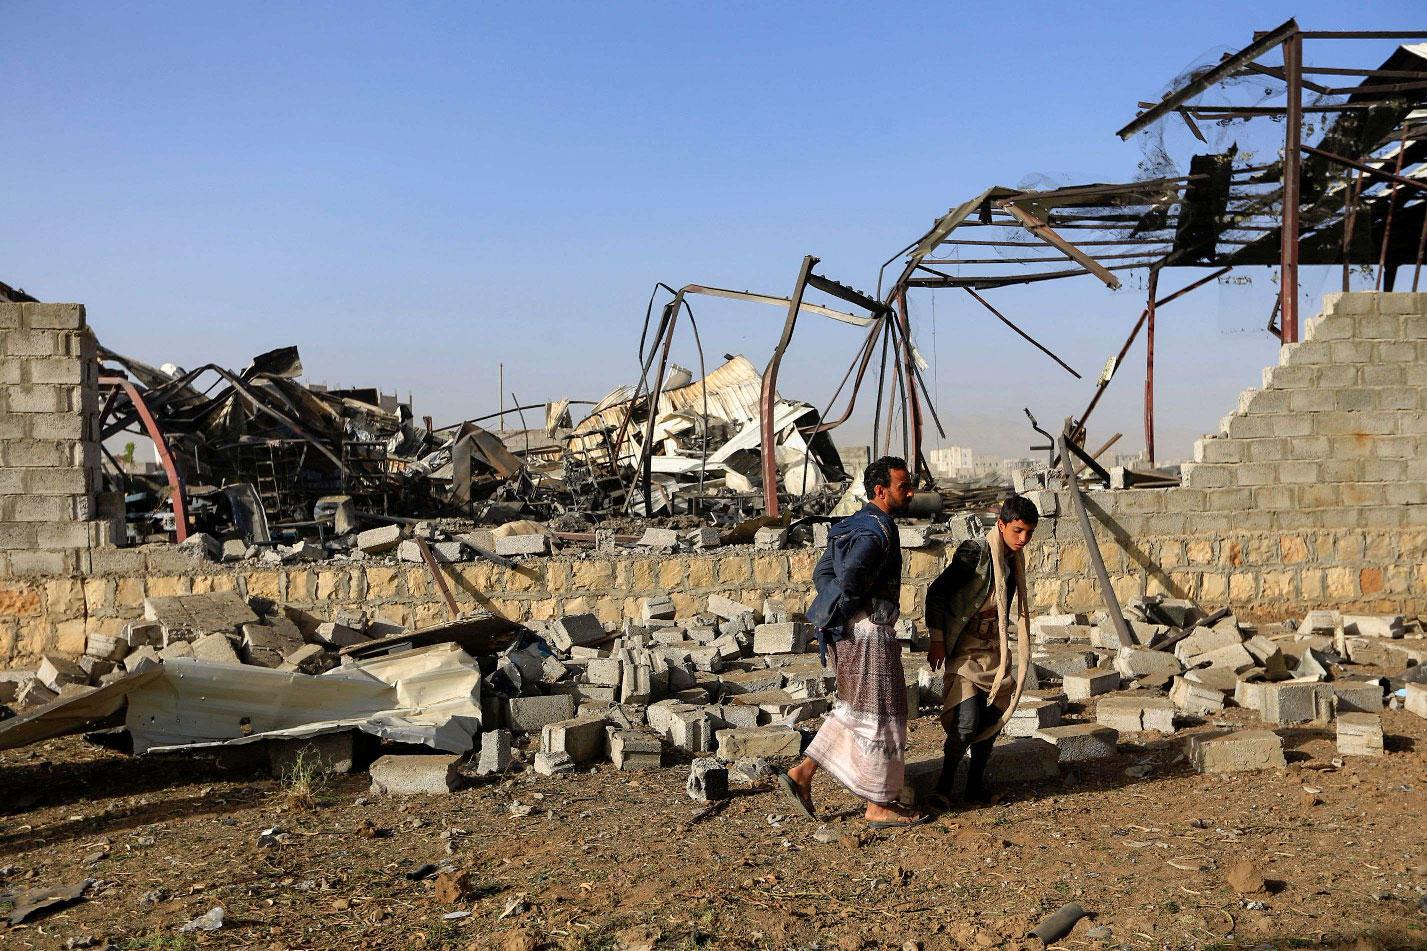  Civilians inspect the damage after a reported airstrike by Saudi-led coalition